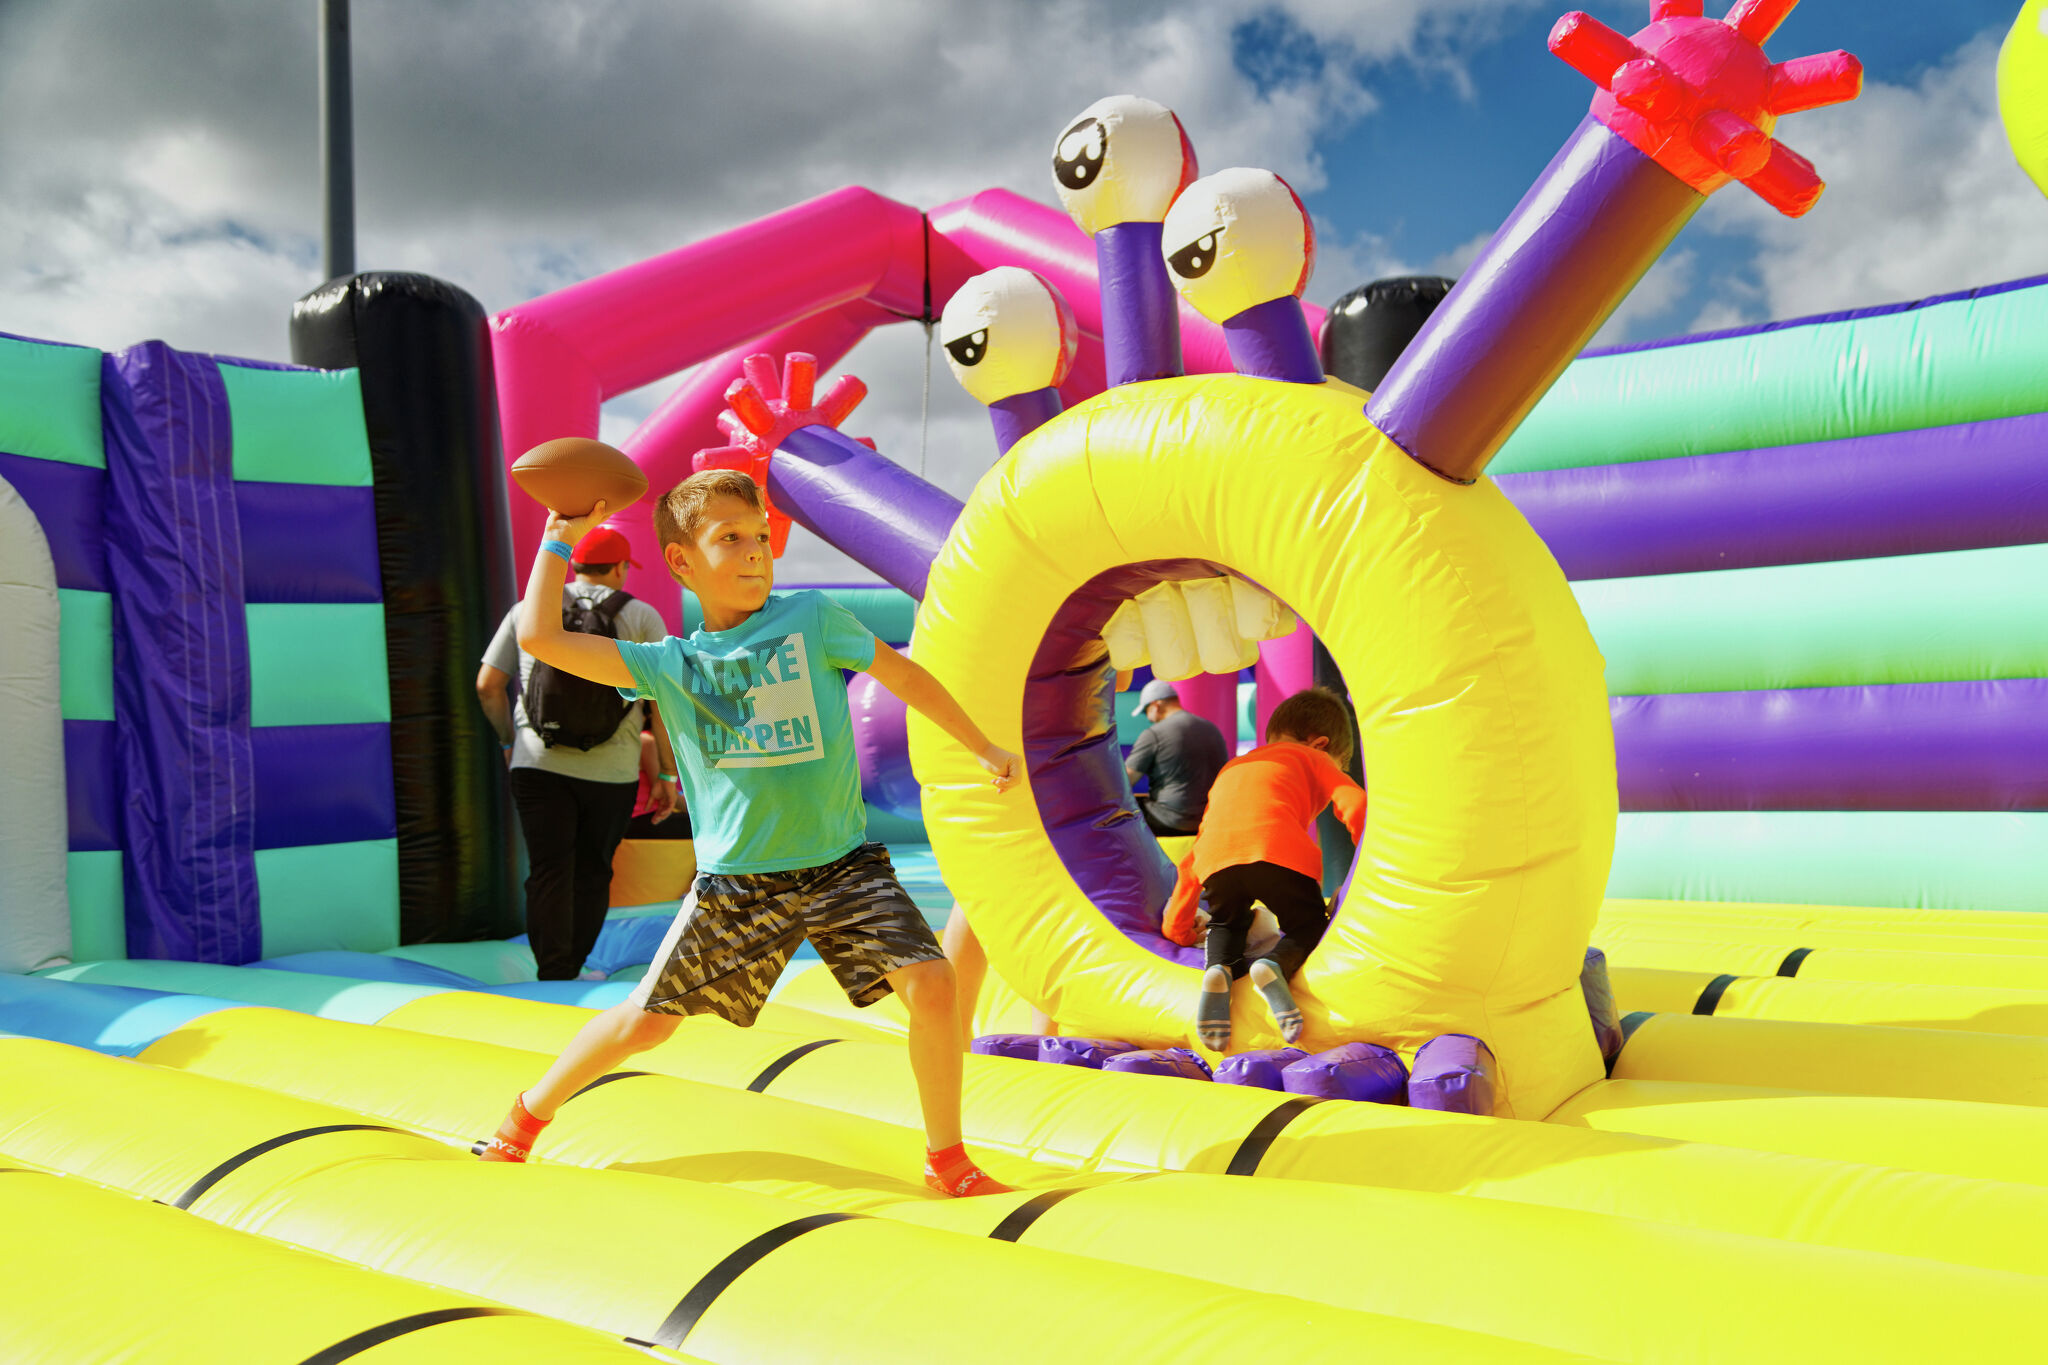 Winner Chosen for 4 Free Tickets to 'World's Largest Bounce House